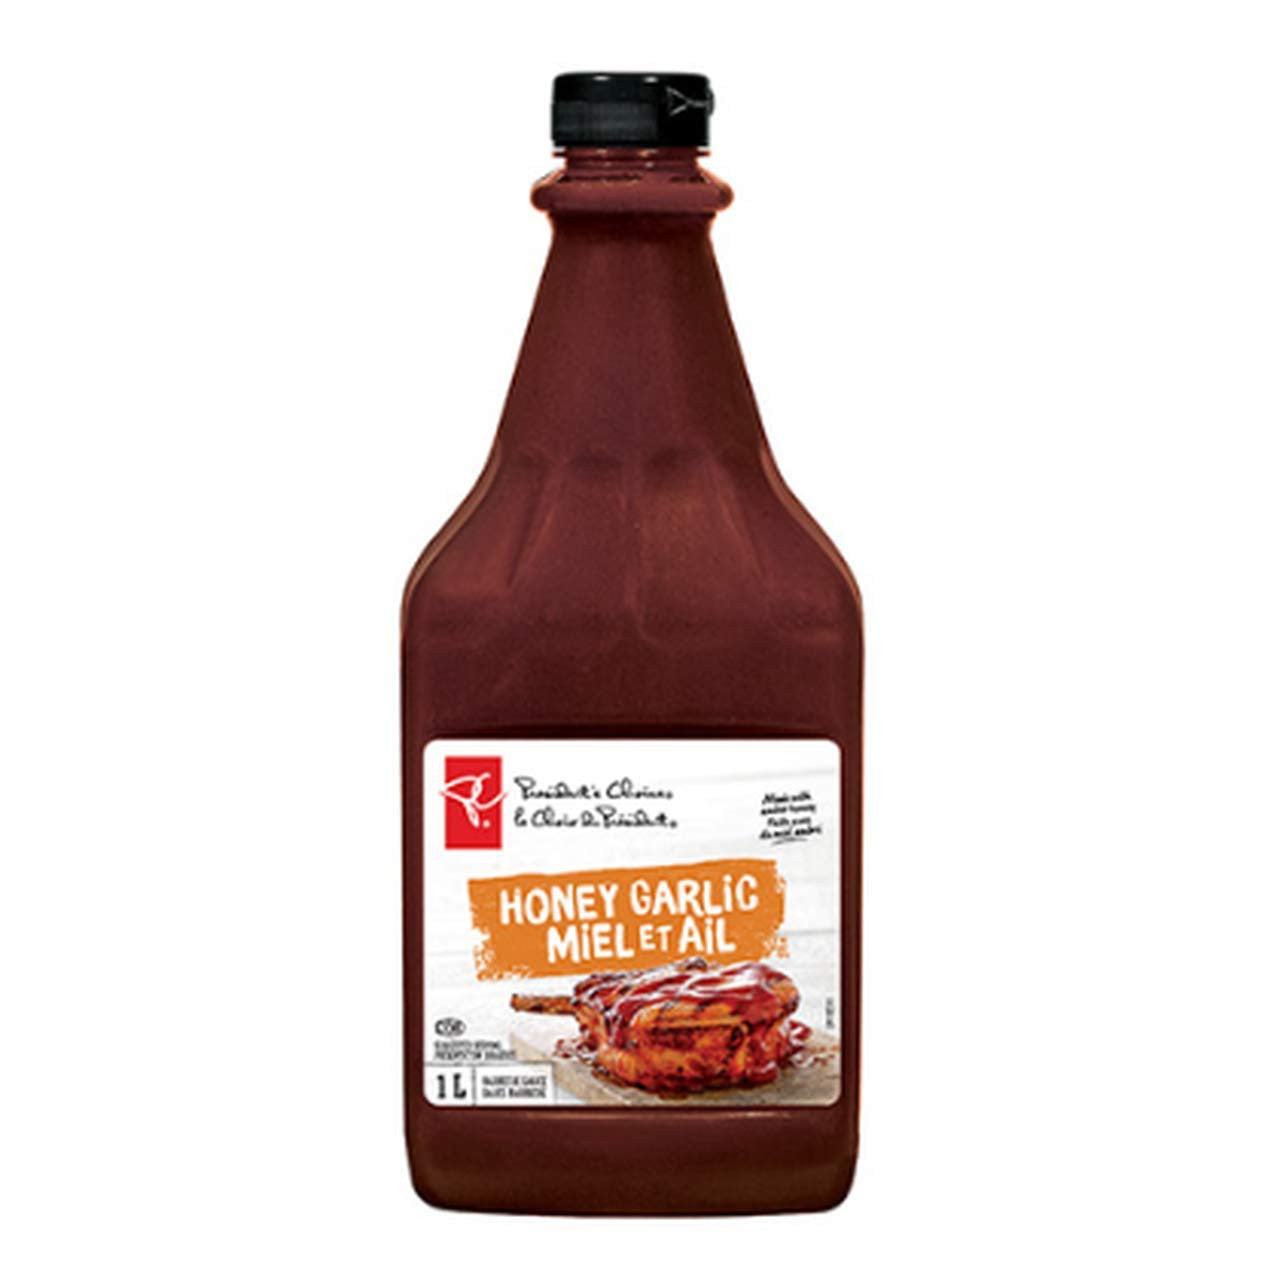 President's Choice Honey Garlic Barbecue Sauce, 1 litre/33.8 fl. oz., {Imported from Canada}